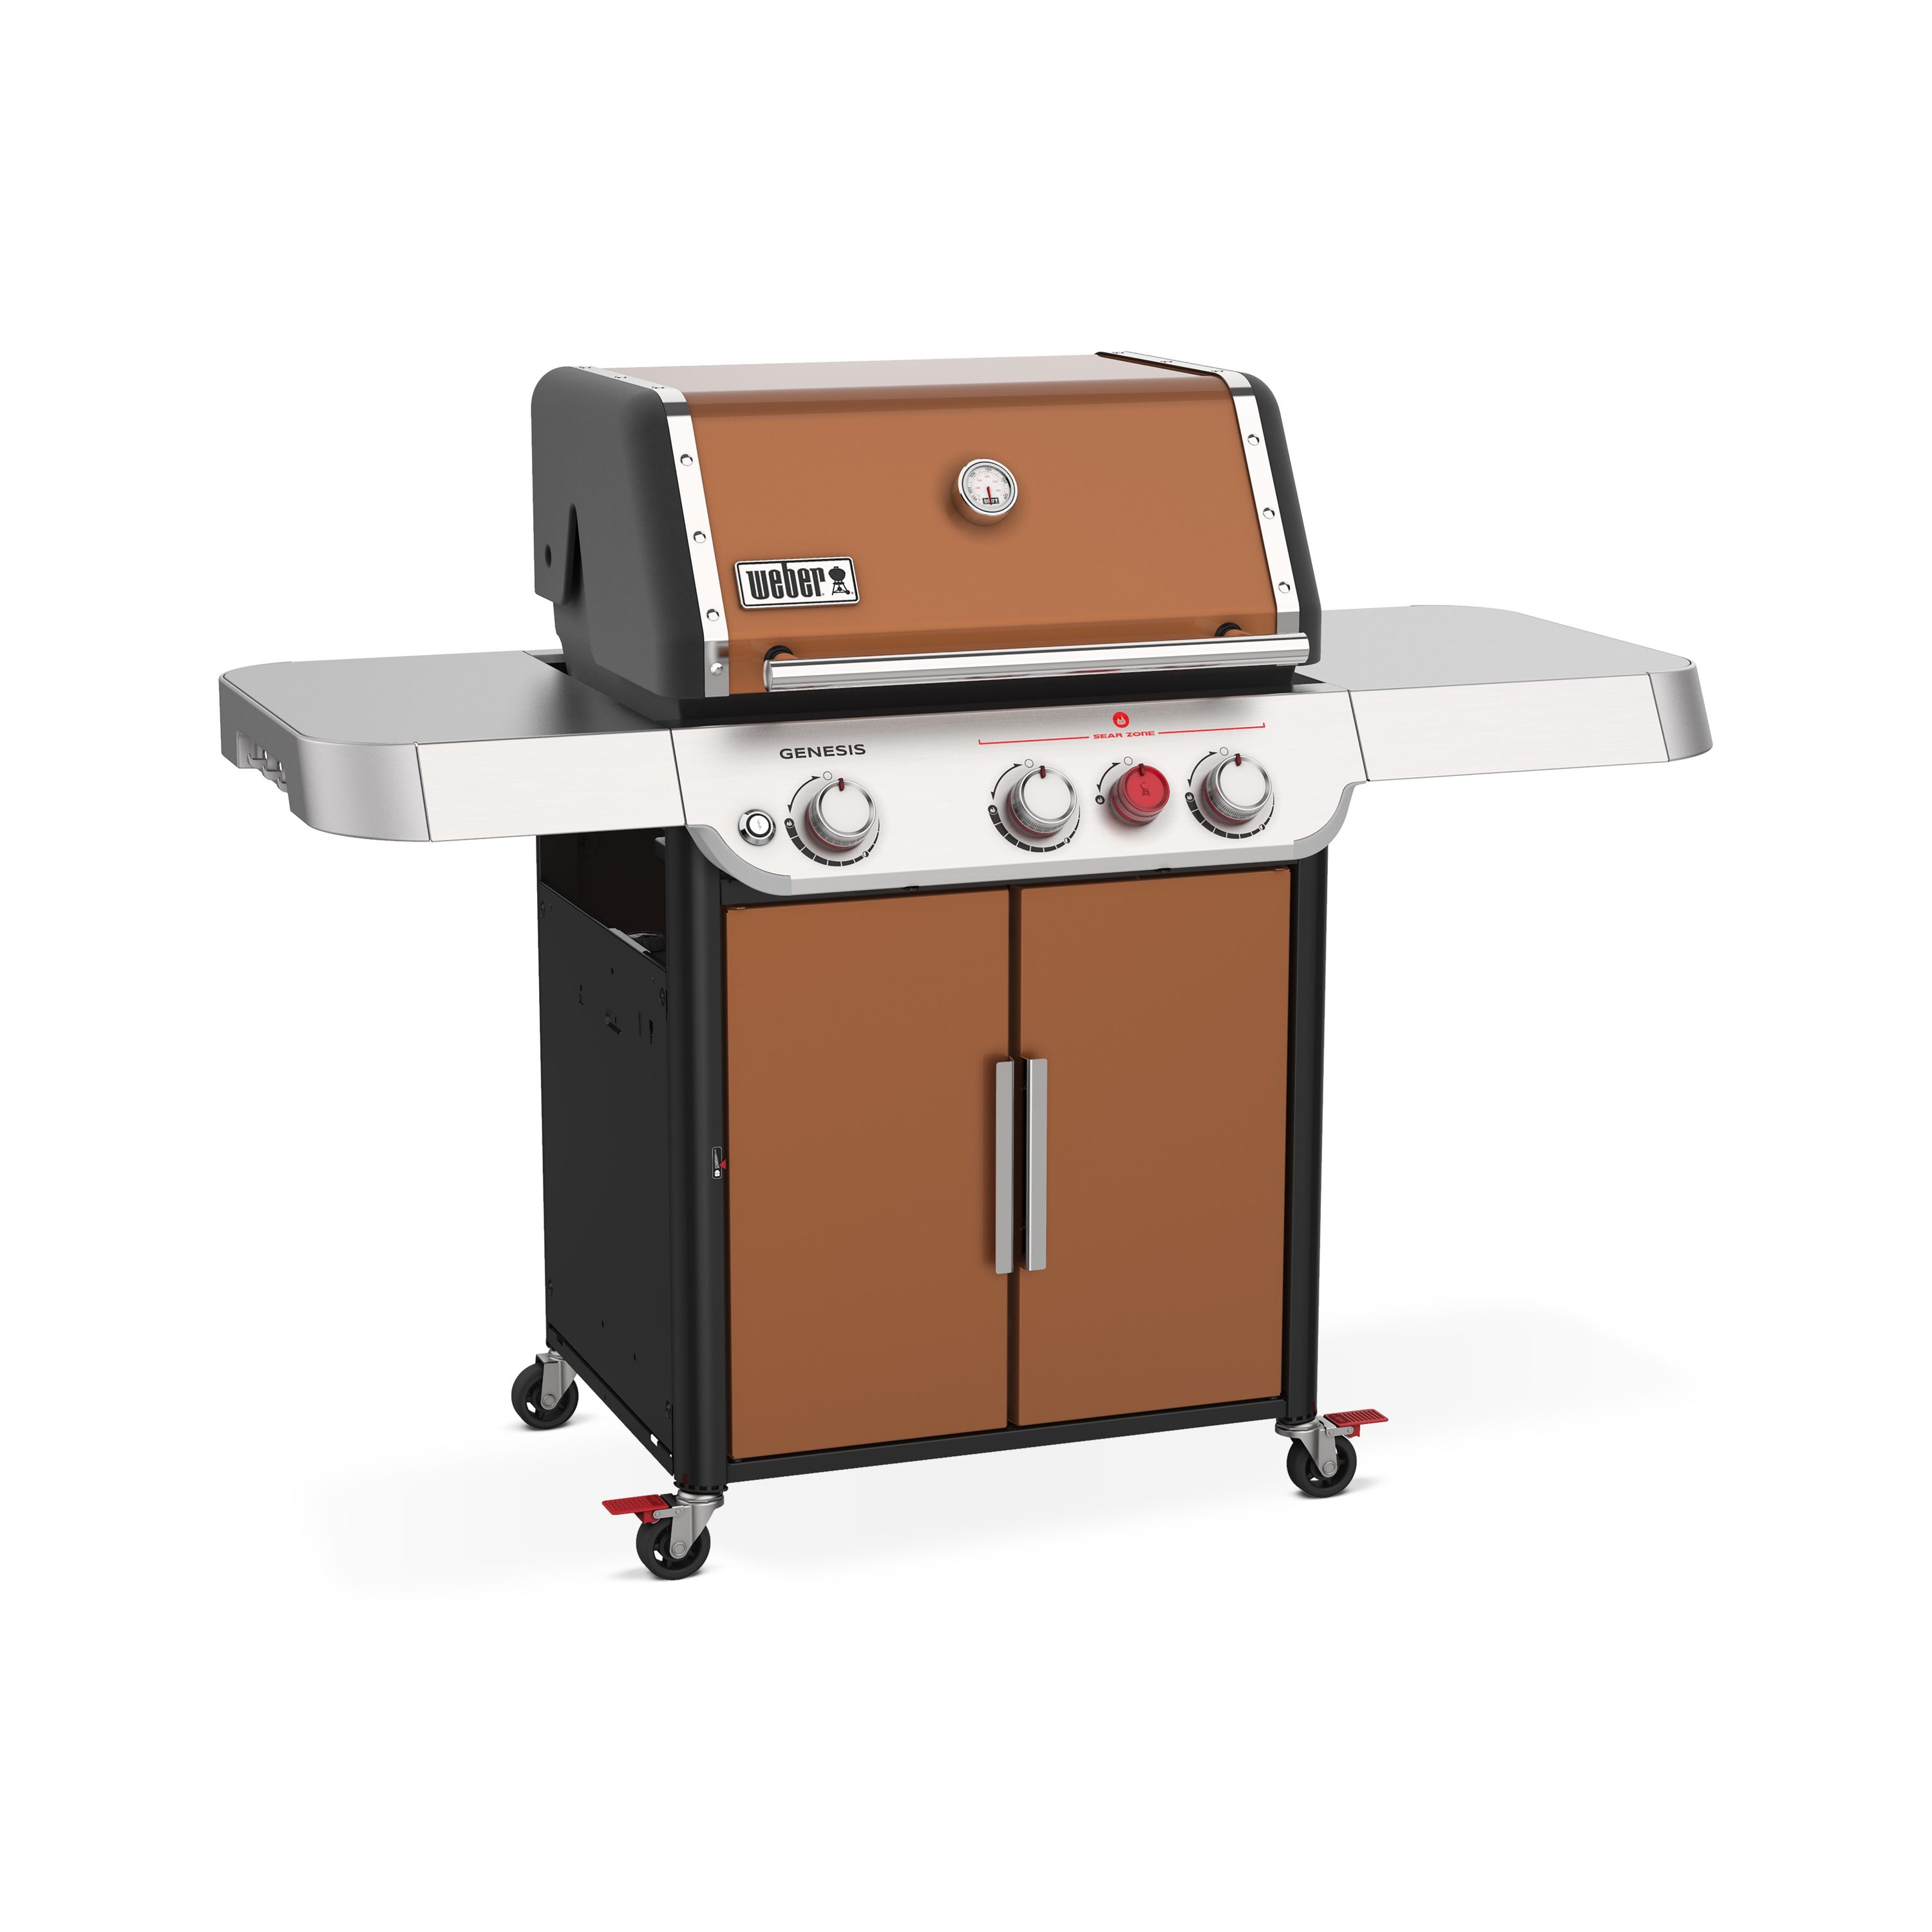 Weber Genesis E-325s Copper 3-Burner Liquid Propane Gas Grill in the Gas Grills at Lowes.com